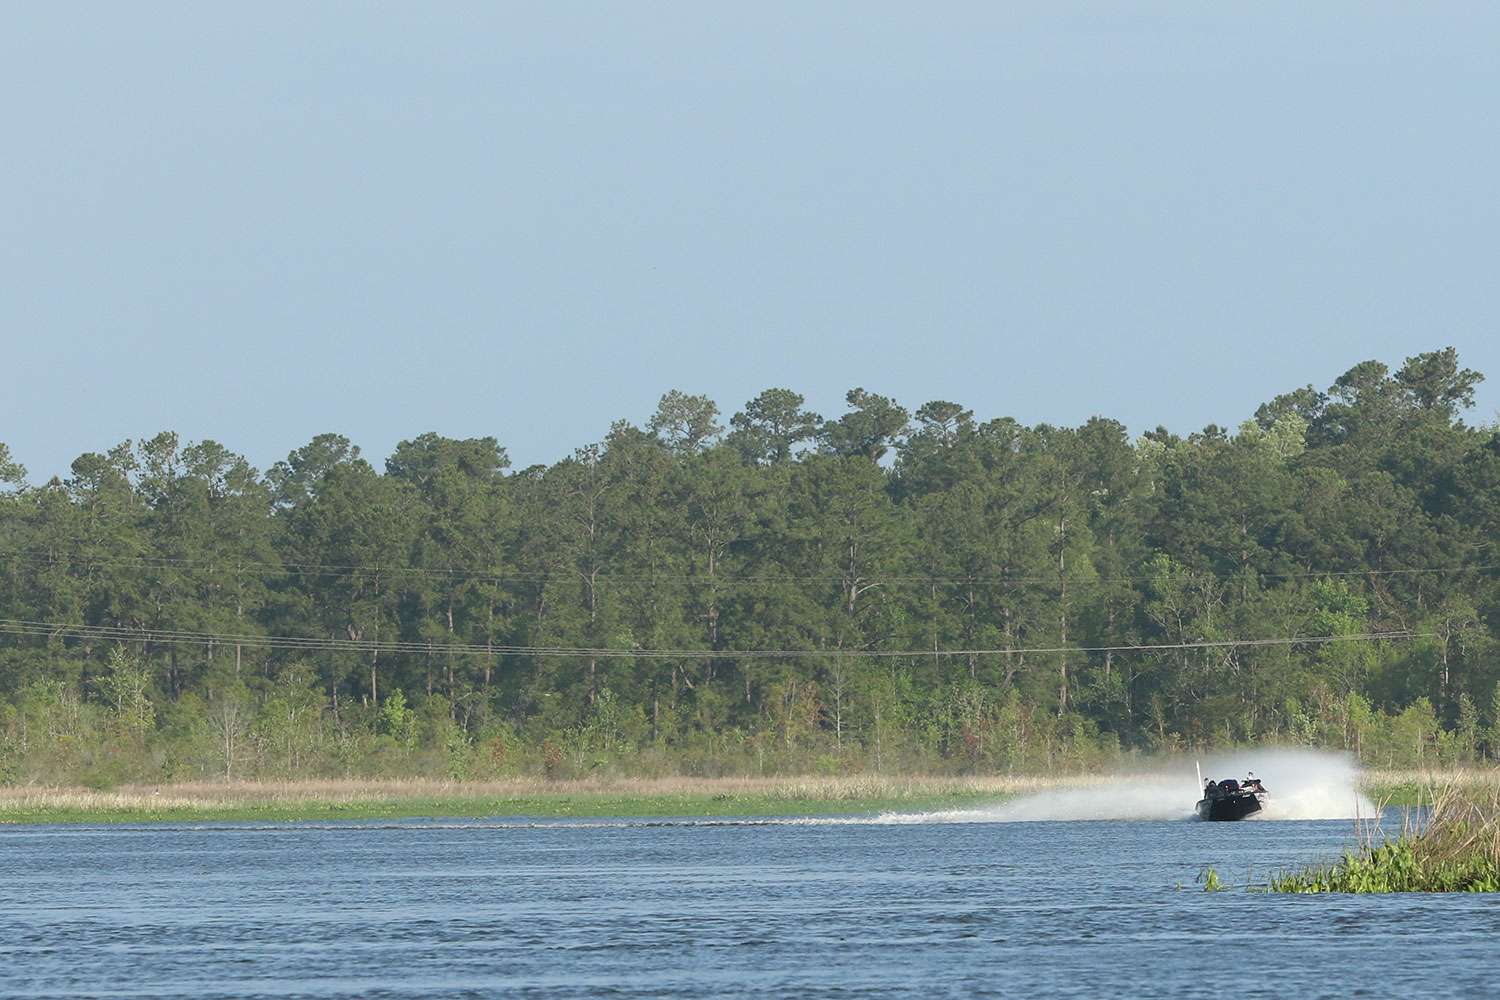 Catch up with Bill Lowen as he gets it going on the second morning of the 2019 Bass Pro Shops Bassmaster Elite at Winyah Bay!